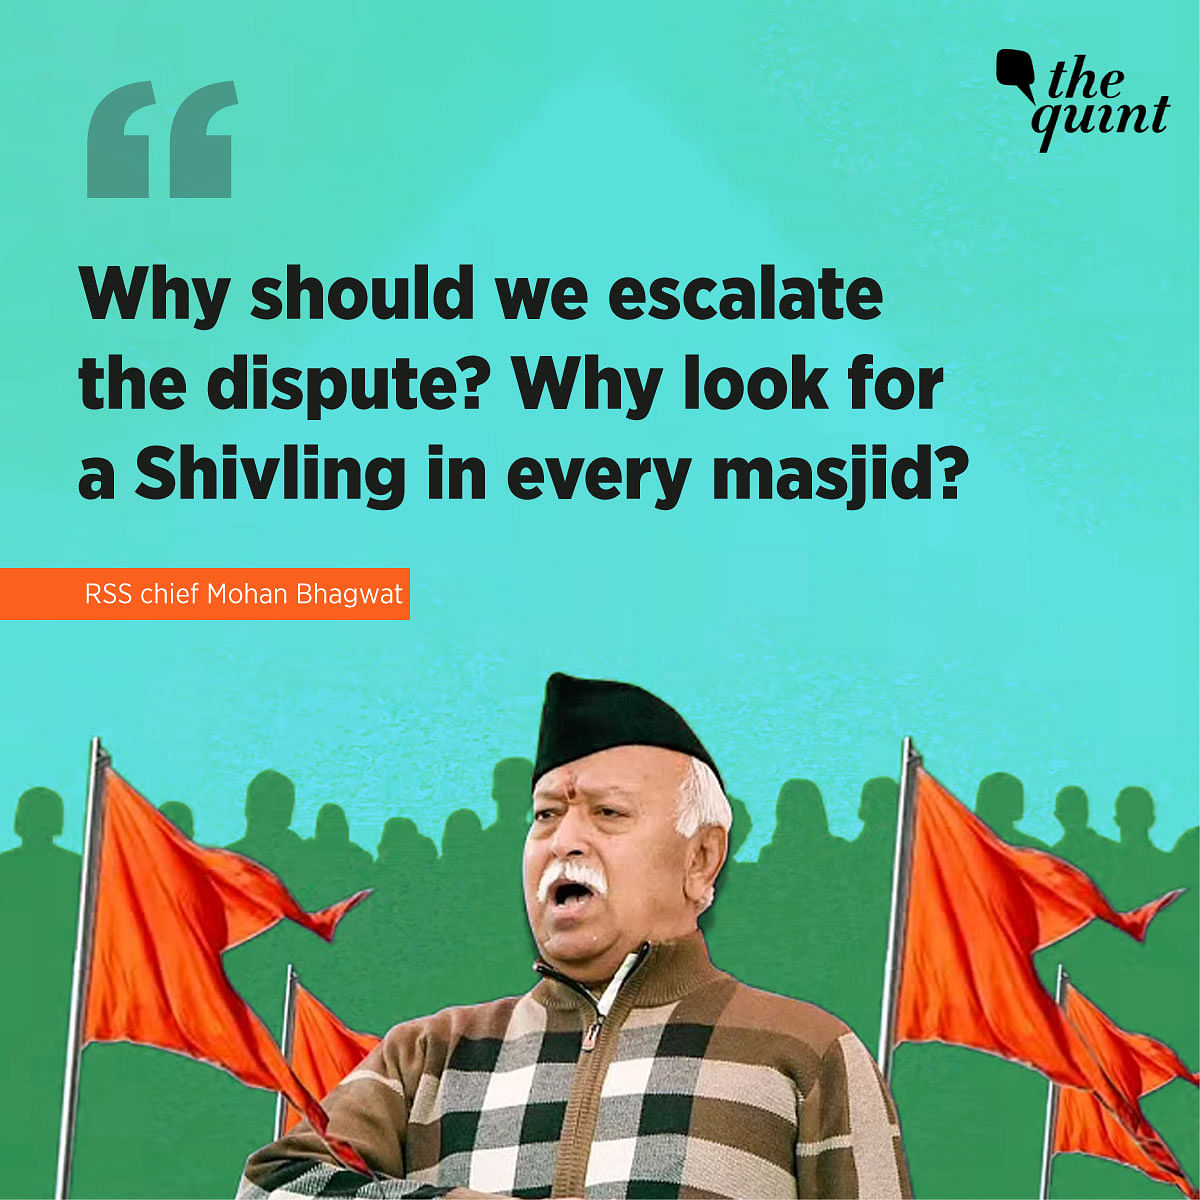 The RSS chief added that Indian Muslims were descendants of 'our rishis, munis, and Kshatriyas'.